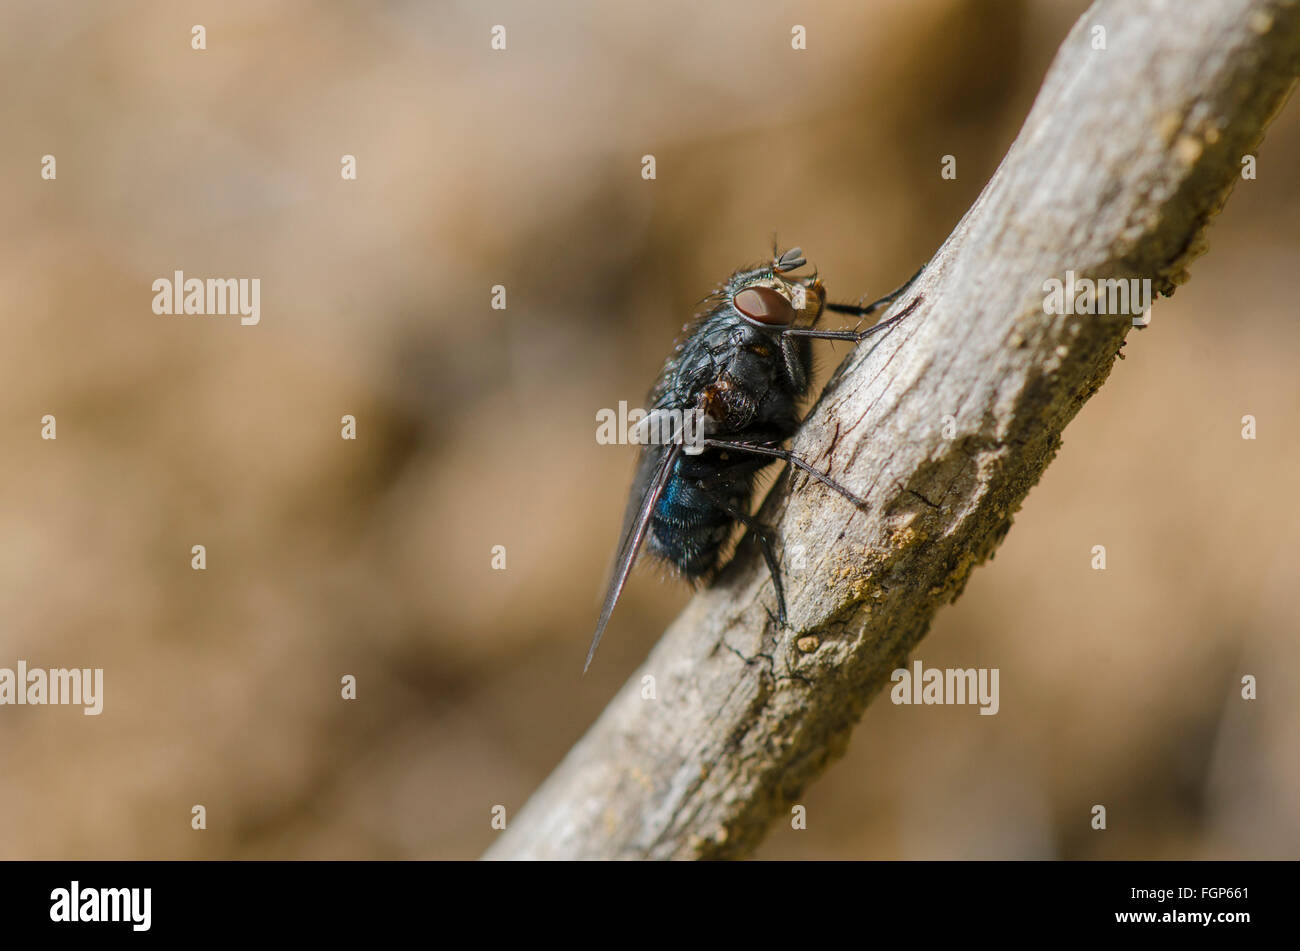 Urban Bluebottle Blowfly, fly insect, Calliphora vicina, on branch. Spain Stock Photo